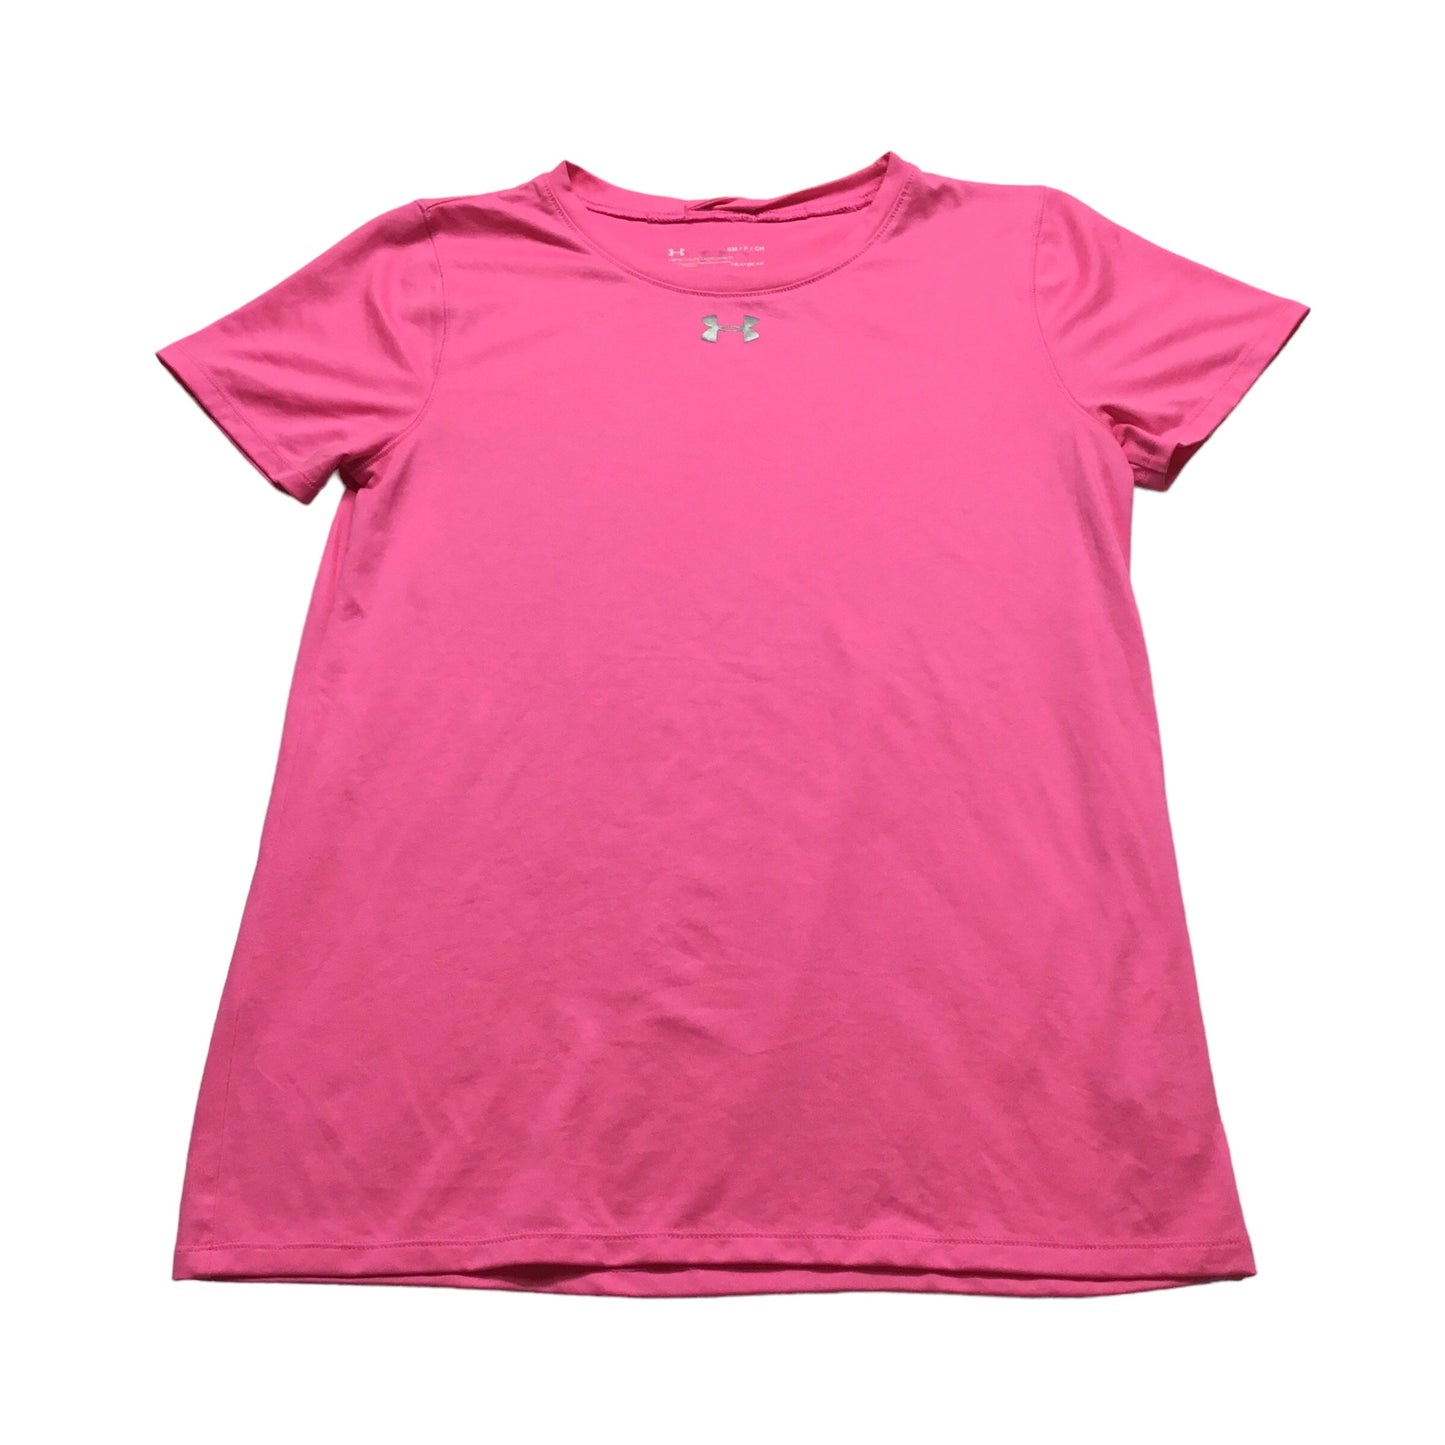 Pink Athletic Top Short Sleeve Under Armour, Size S